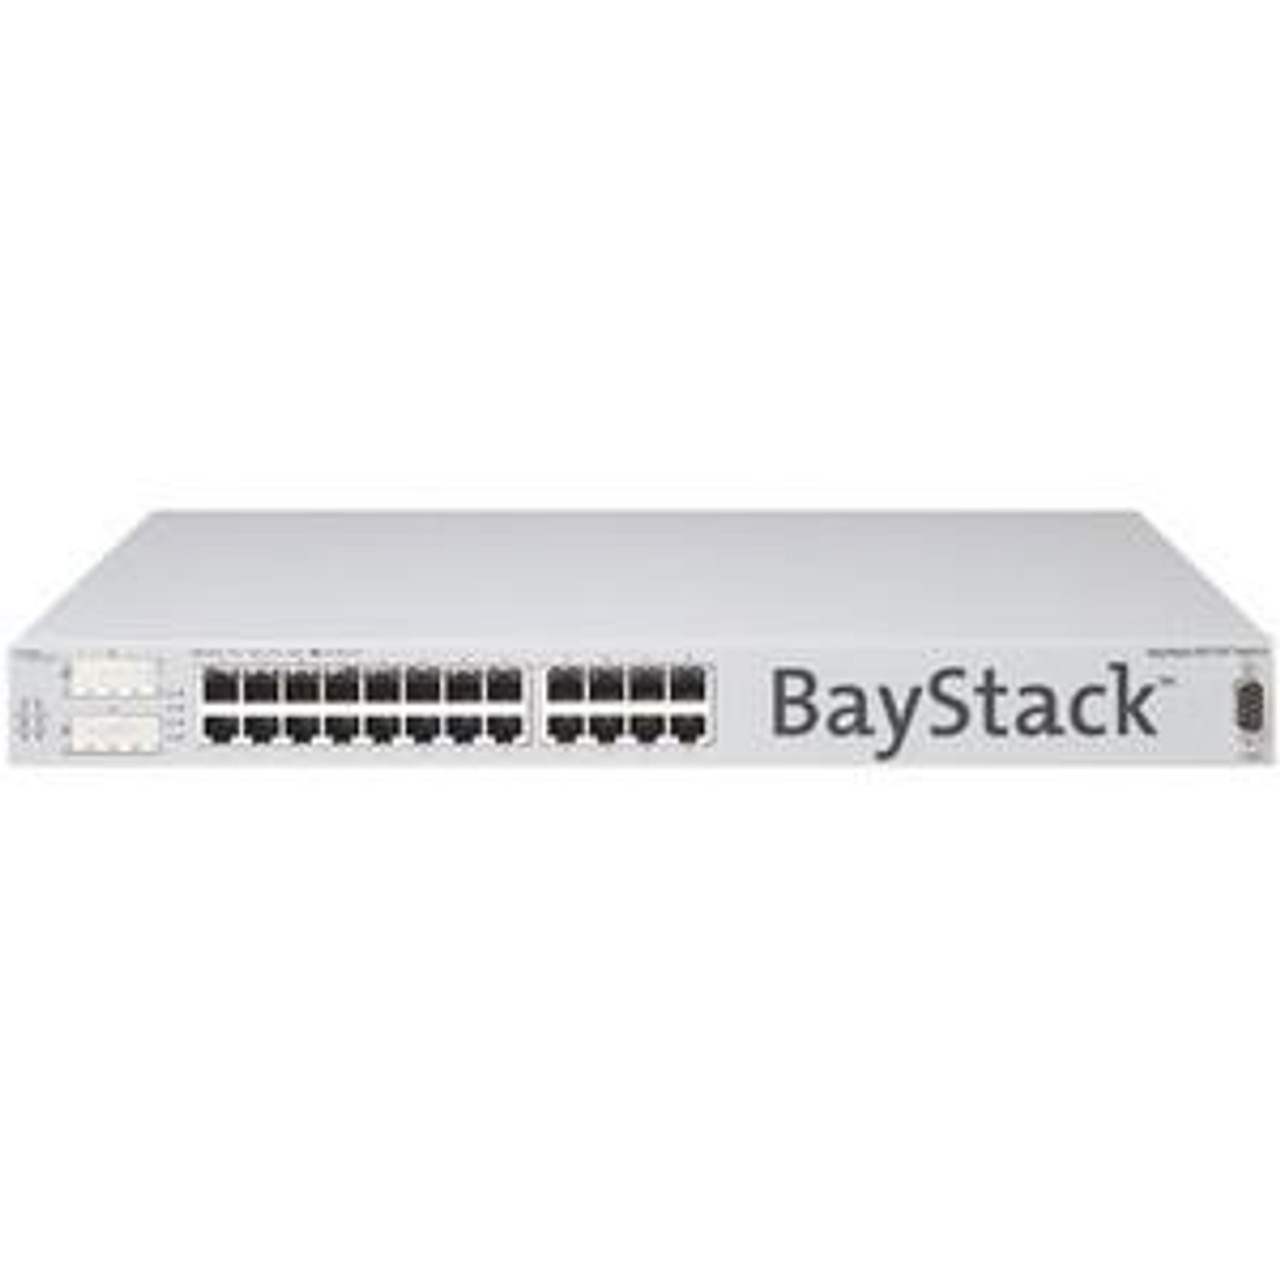 NT2220AAE5 Nortel 470-24T Managed Stackable Ethernet Switch 2 x GBIC 24 x 10/100Base-TX LAN (Refurbished)